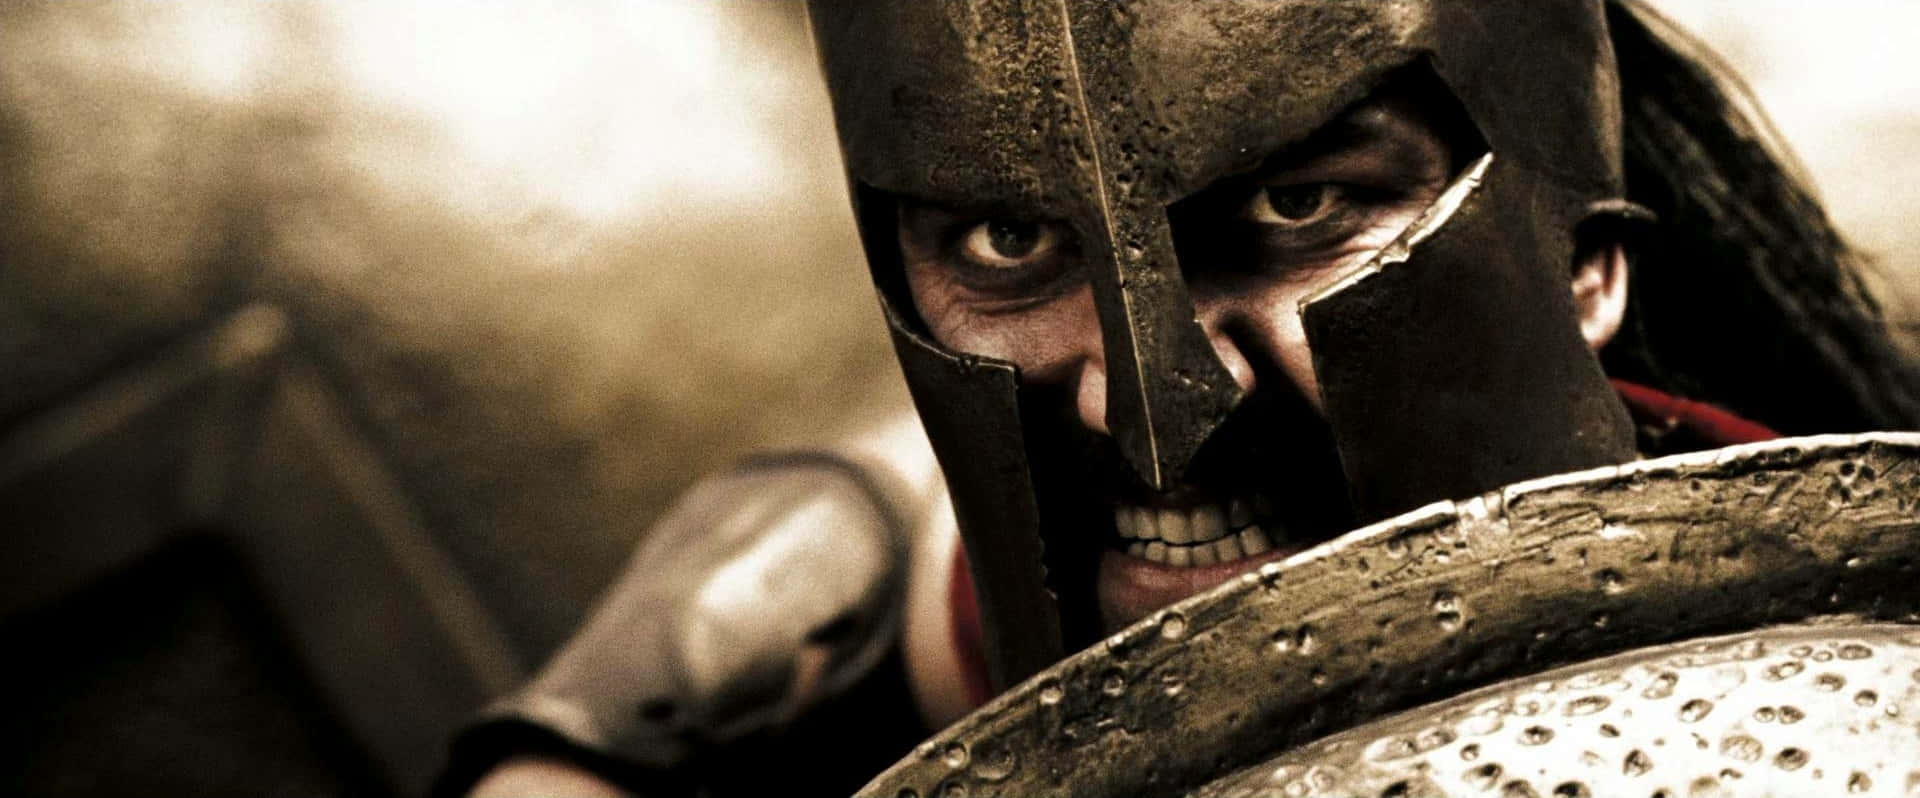 An Armored Spartan From The 300 Movie Wallpaper